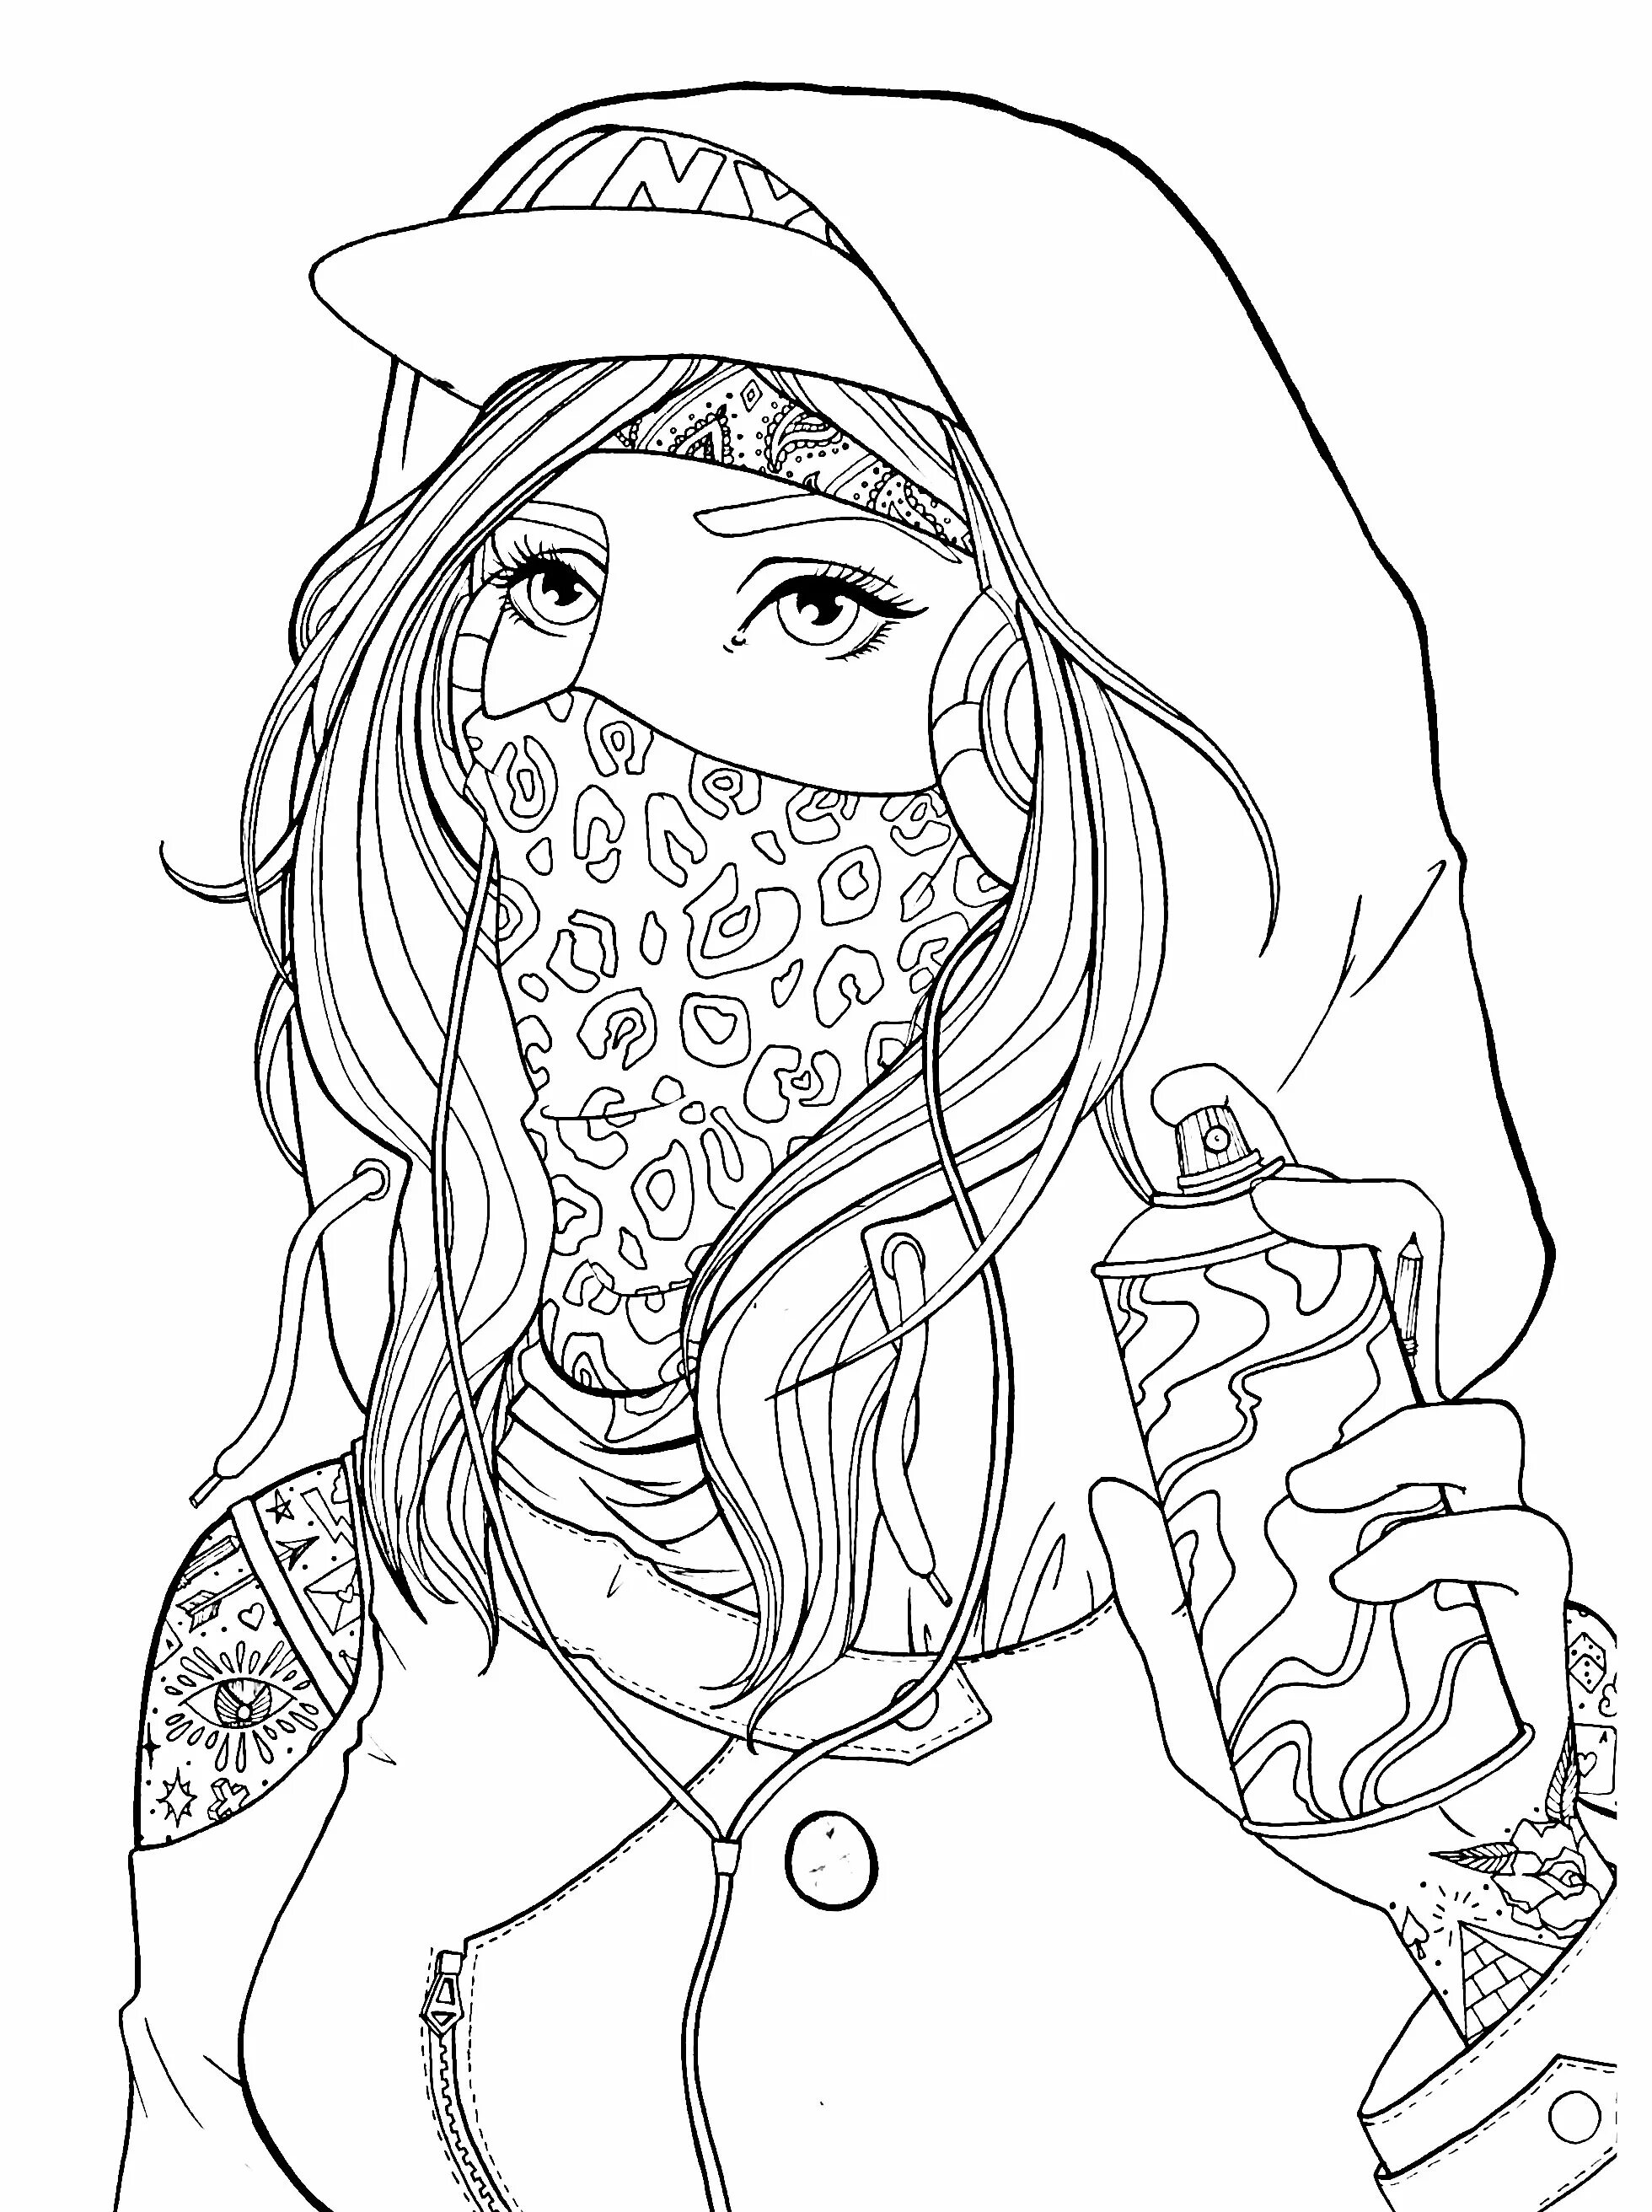 Color-fabulous coloring page 16-17 years old